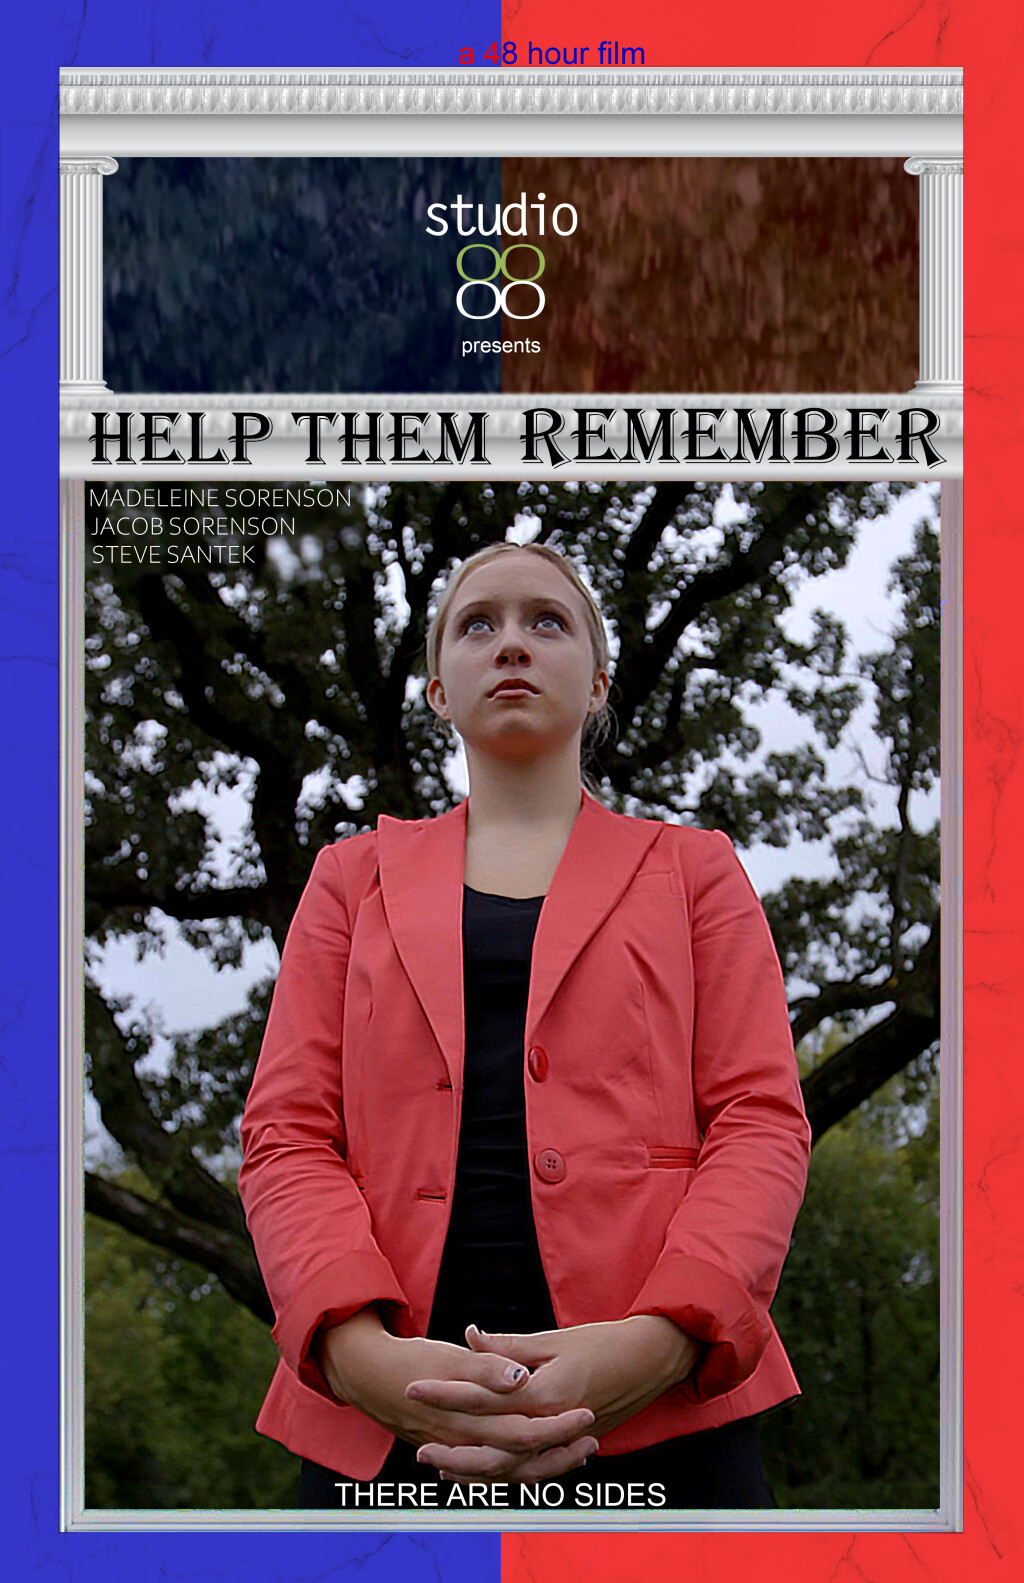 Filmposter for Help Them Remember